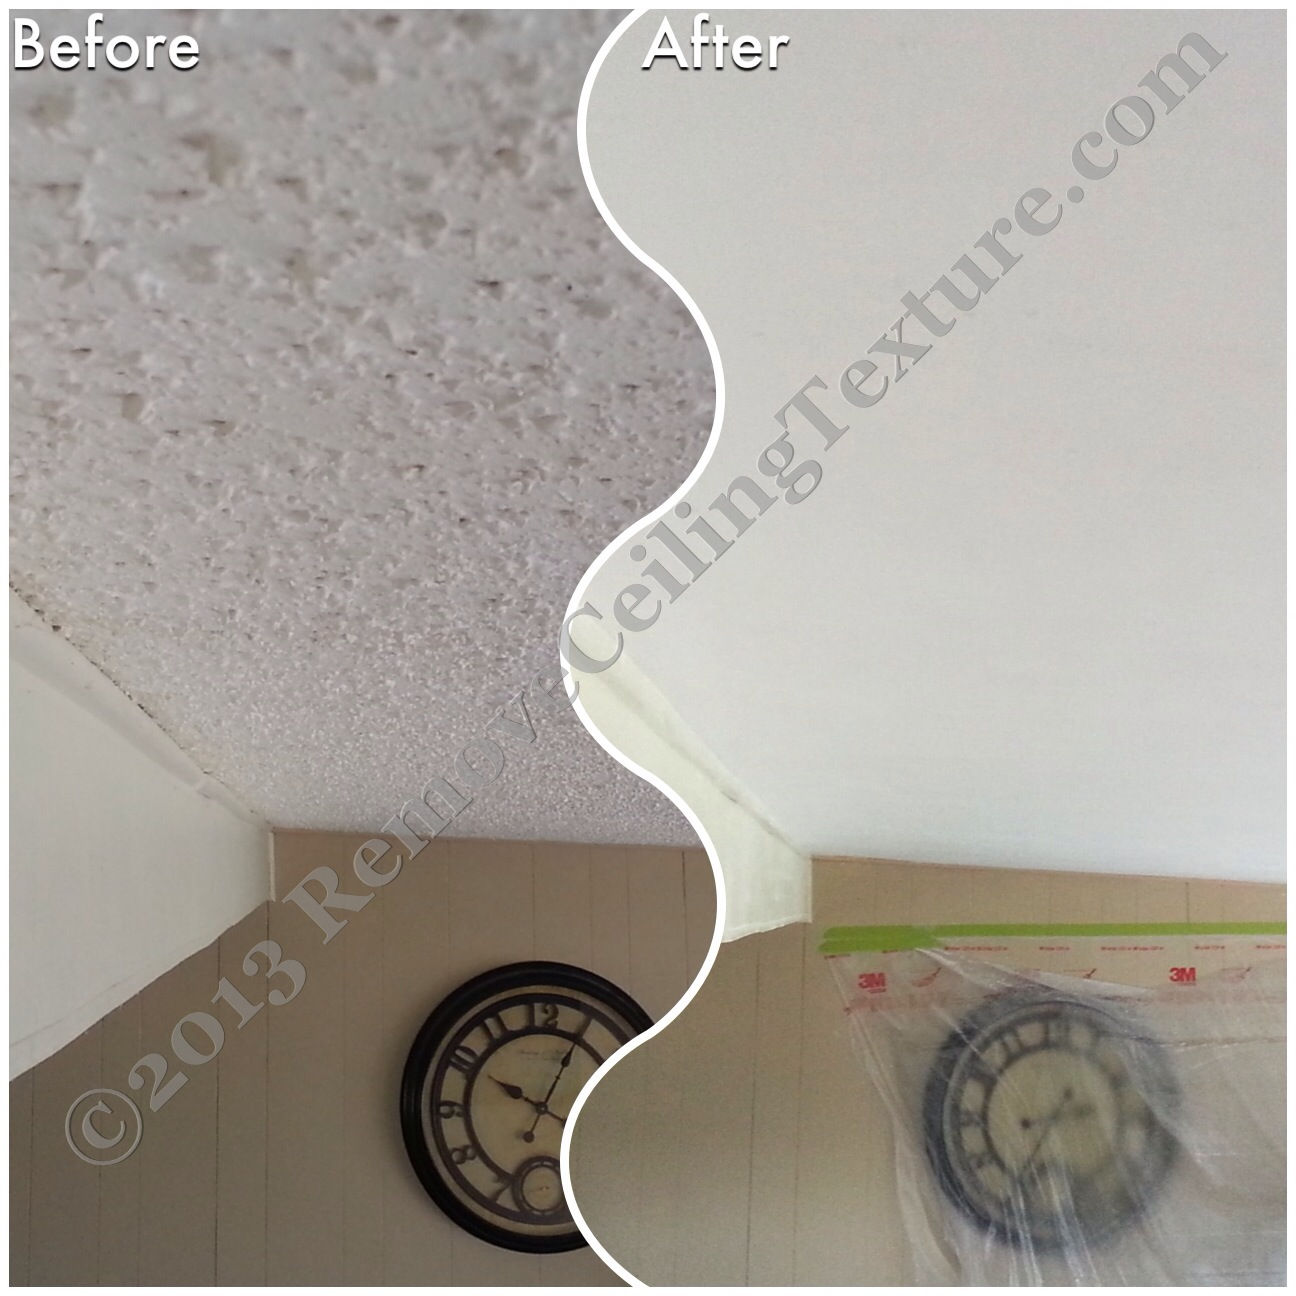 Ceiling Texture Removal in Kamloops - Modular home in Kamloops has popcorn removed from vaulted ceiling